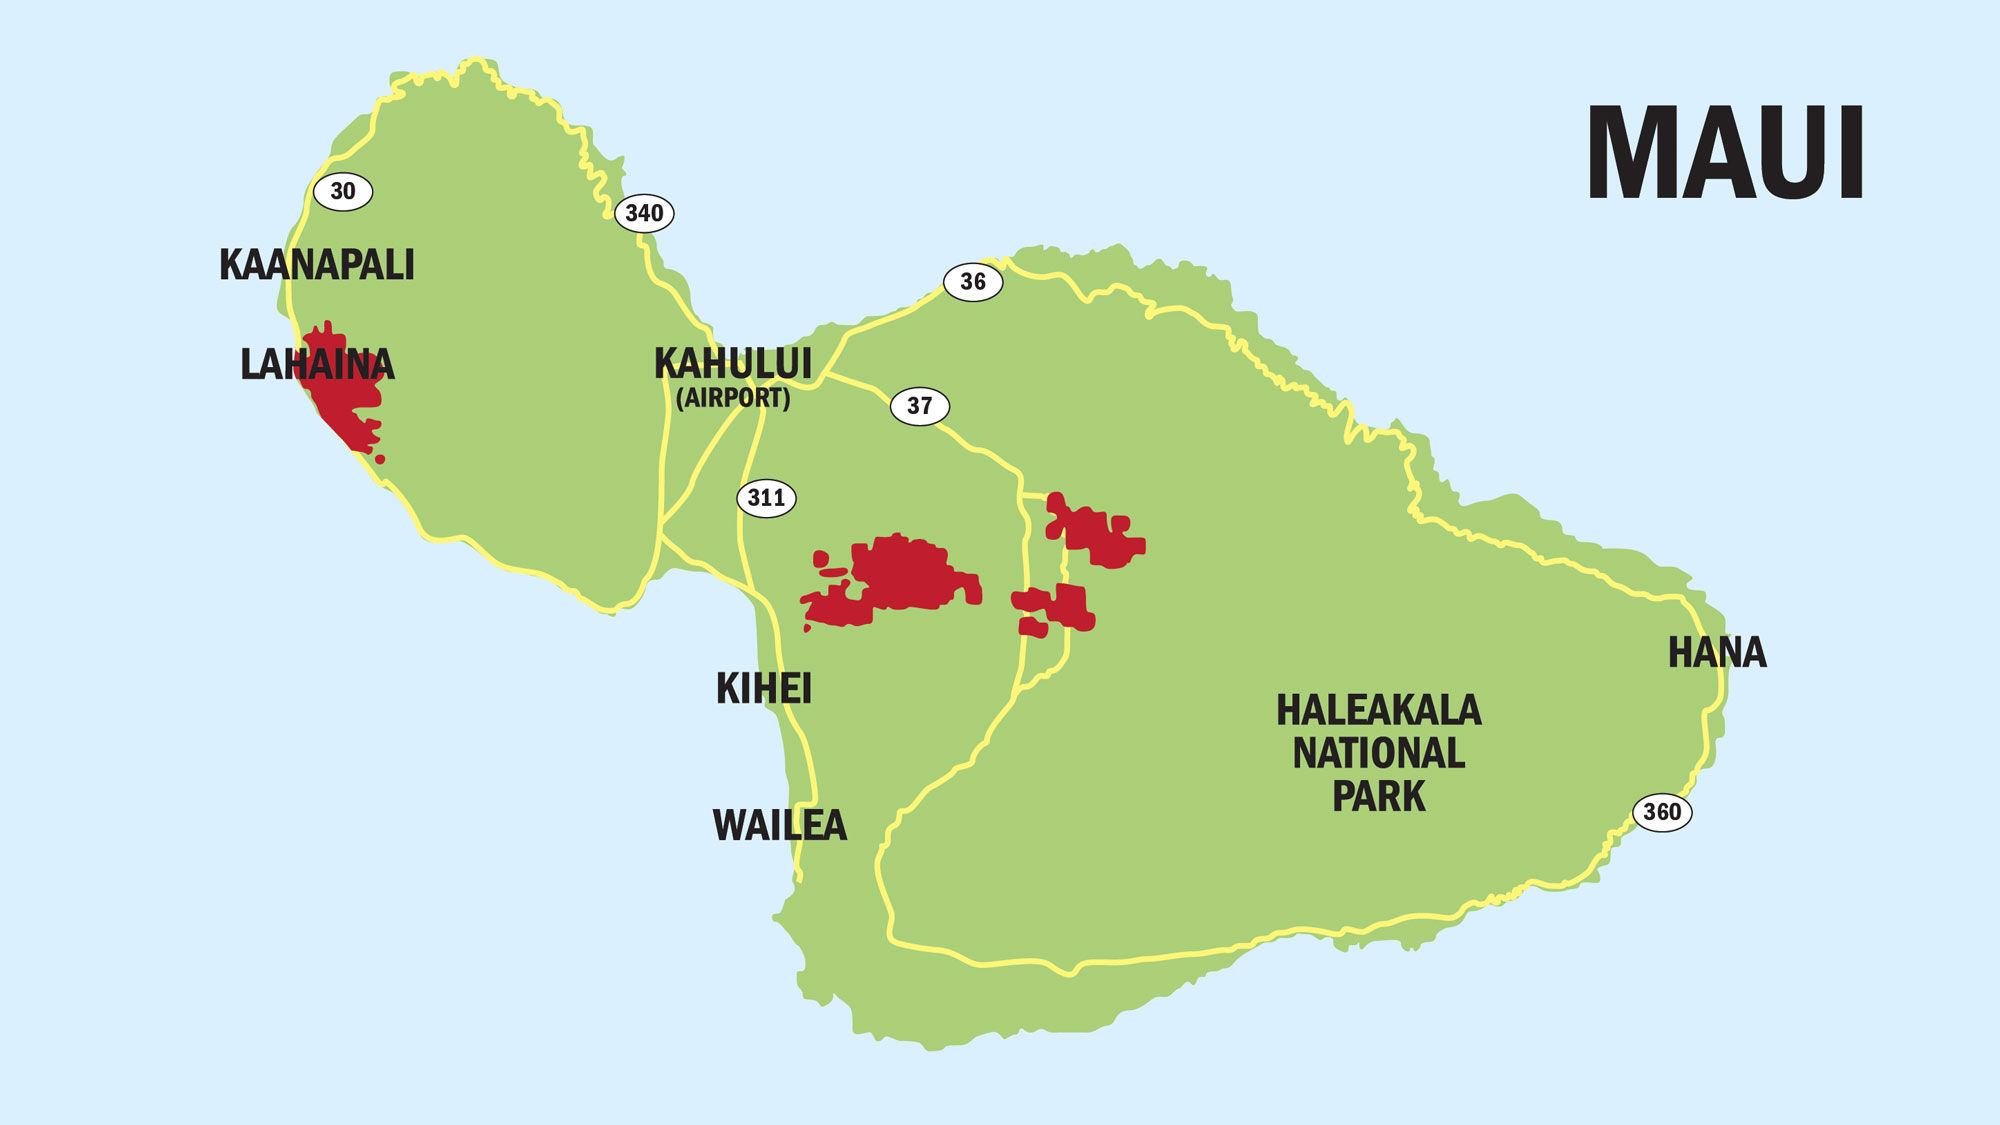 Areas affected by wildfires on Maui.